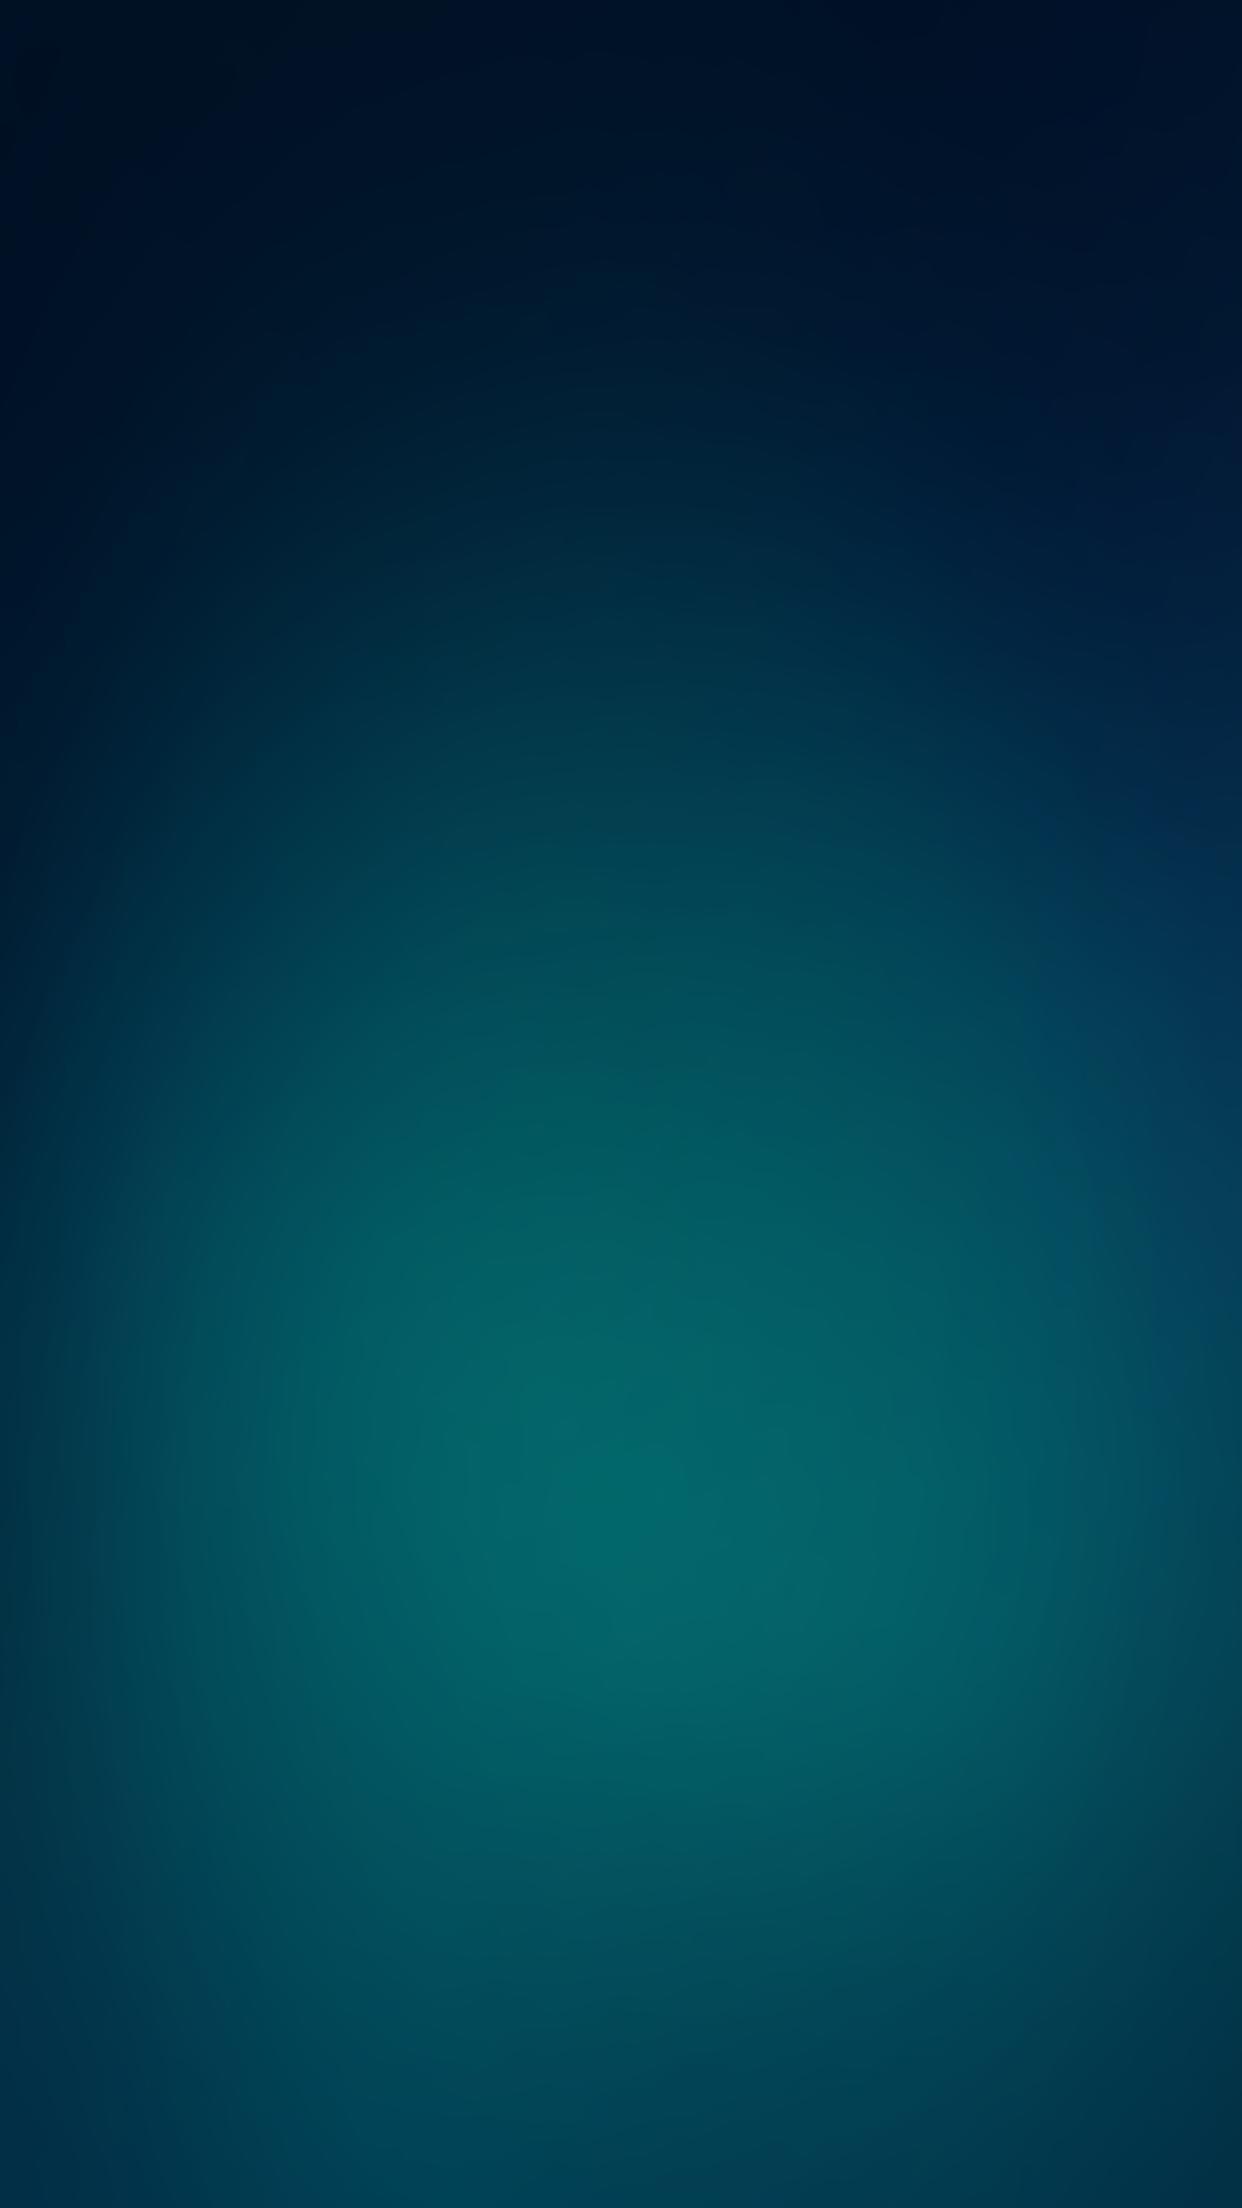 Iphone 7 Plus Teal , HD Wallpaper & Backgrounds